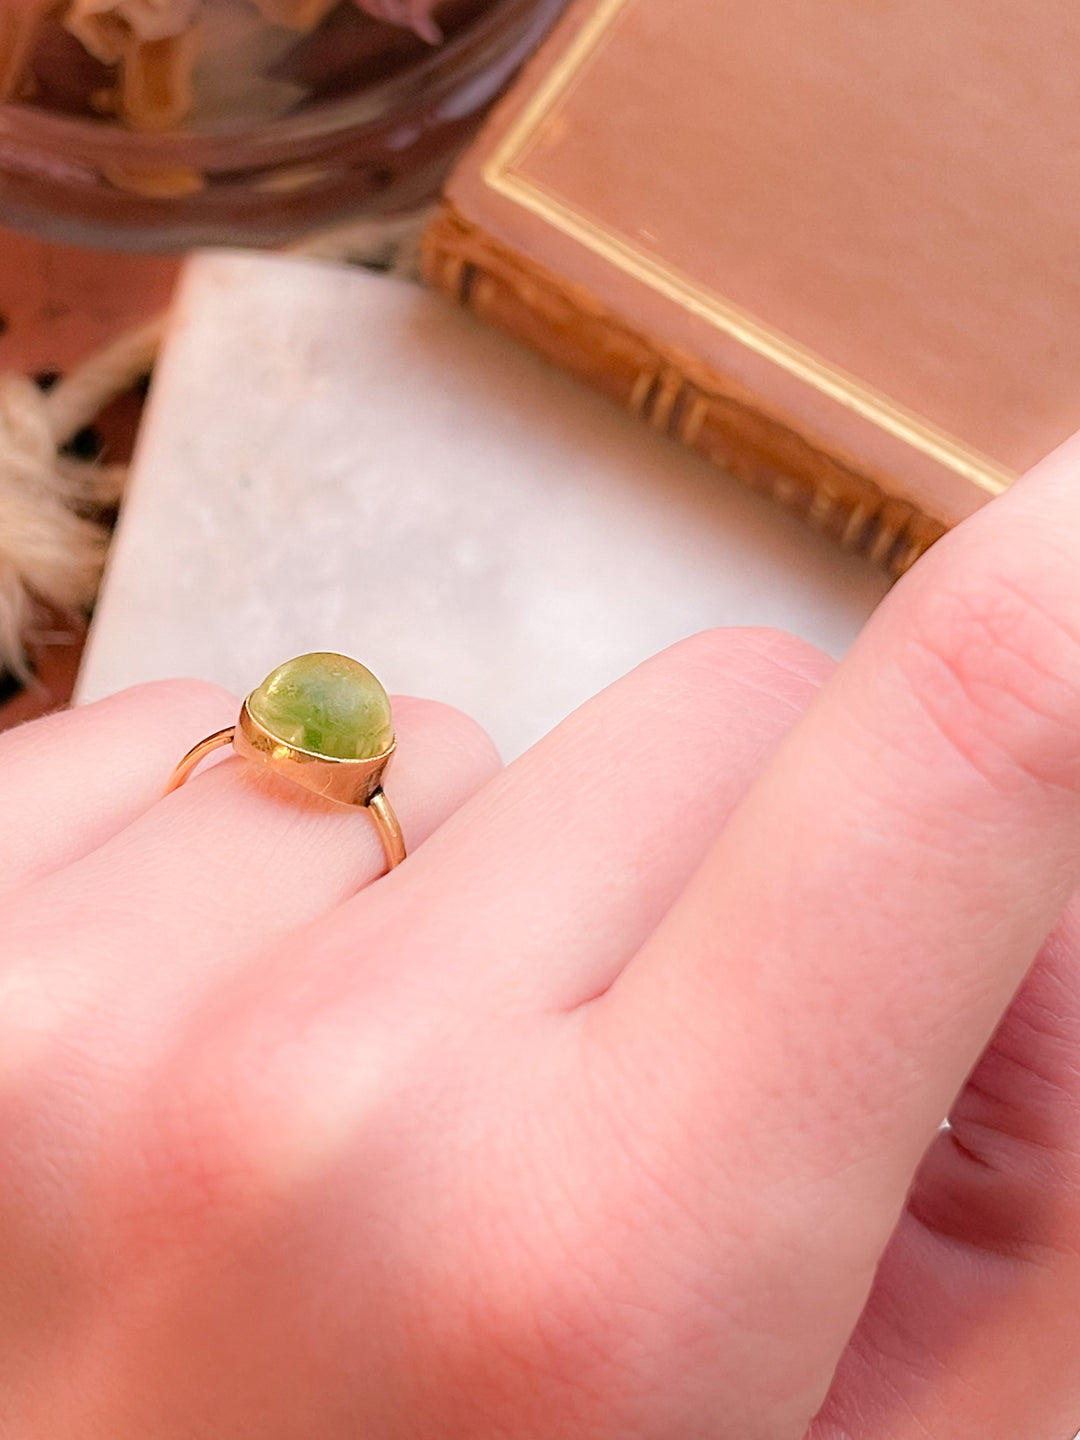 French 18k Ring Featuring Sphere of Sage Green Glass to Mimic Peridot